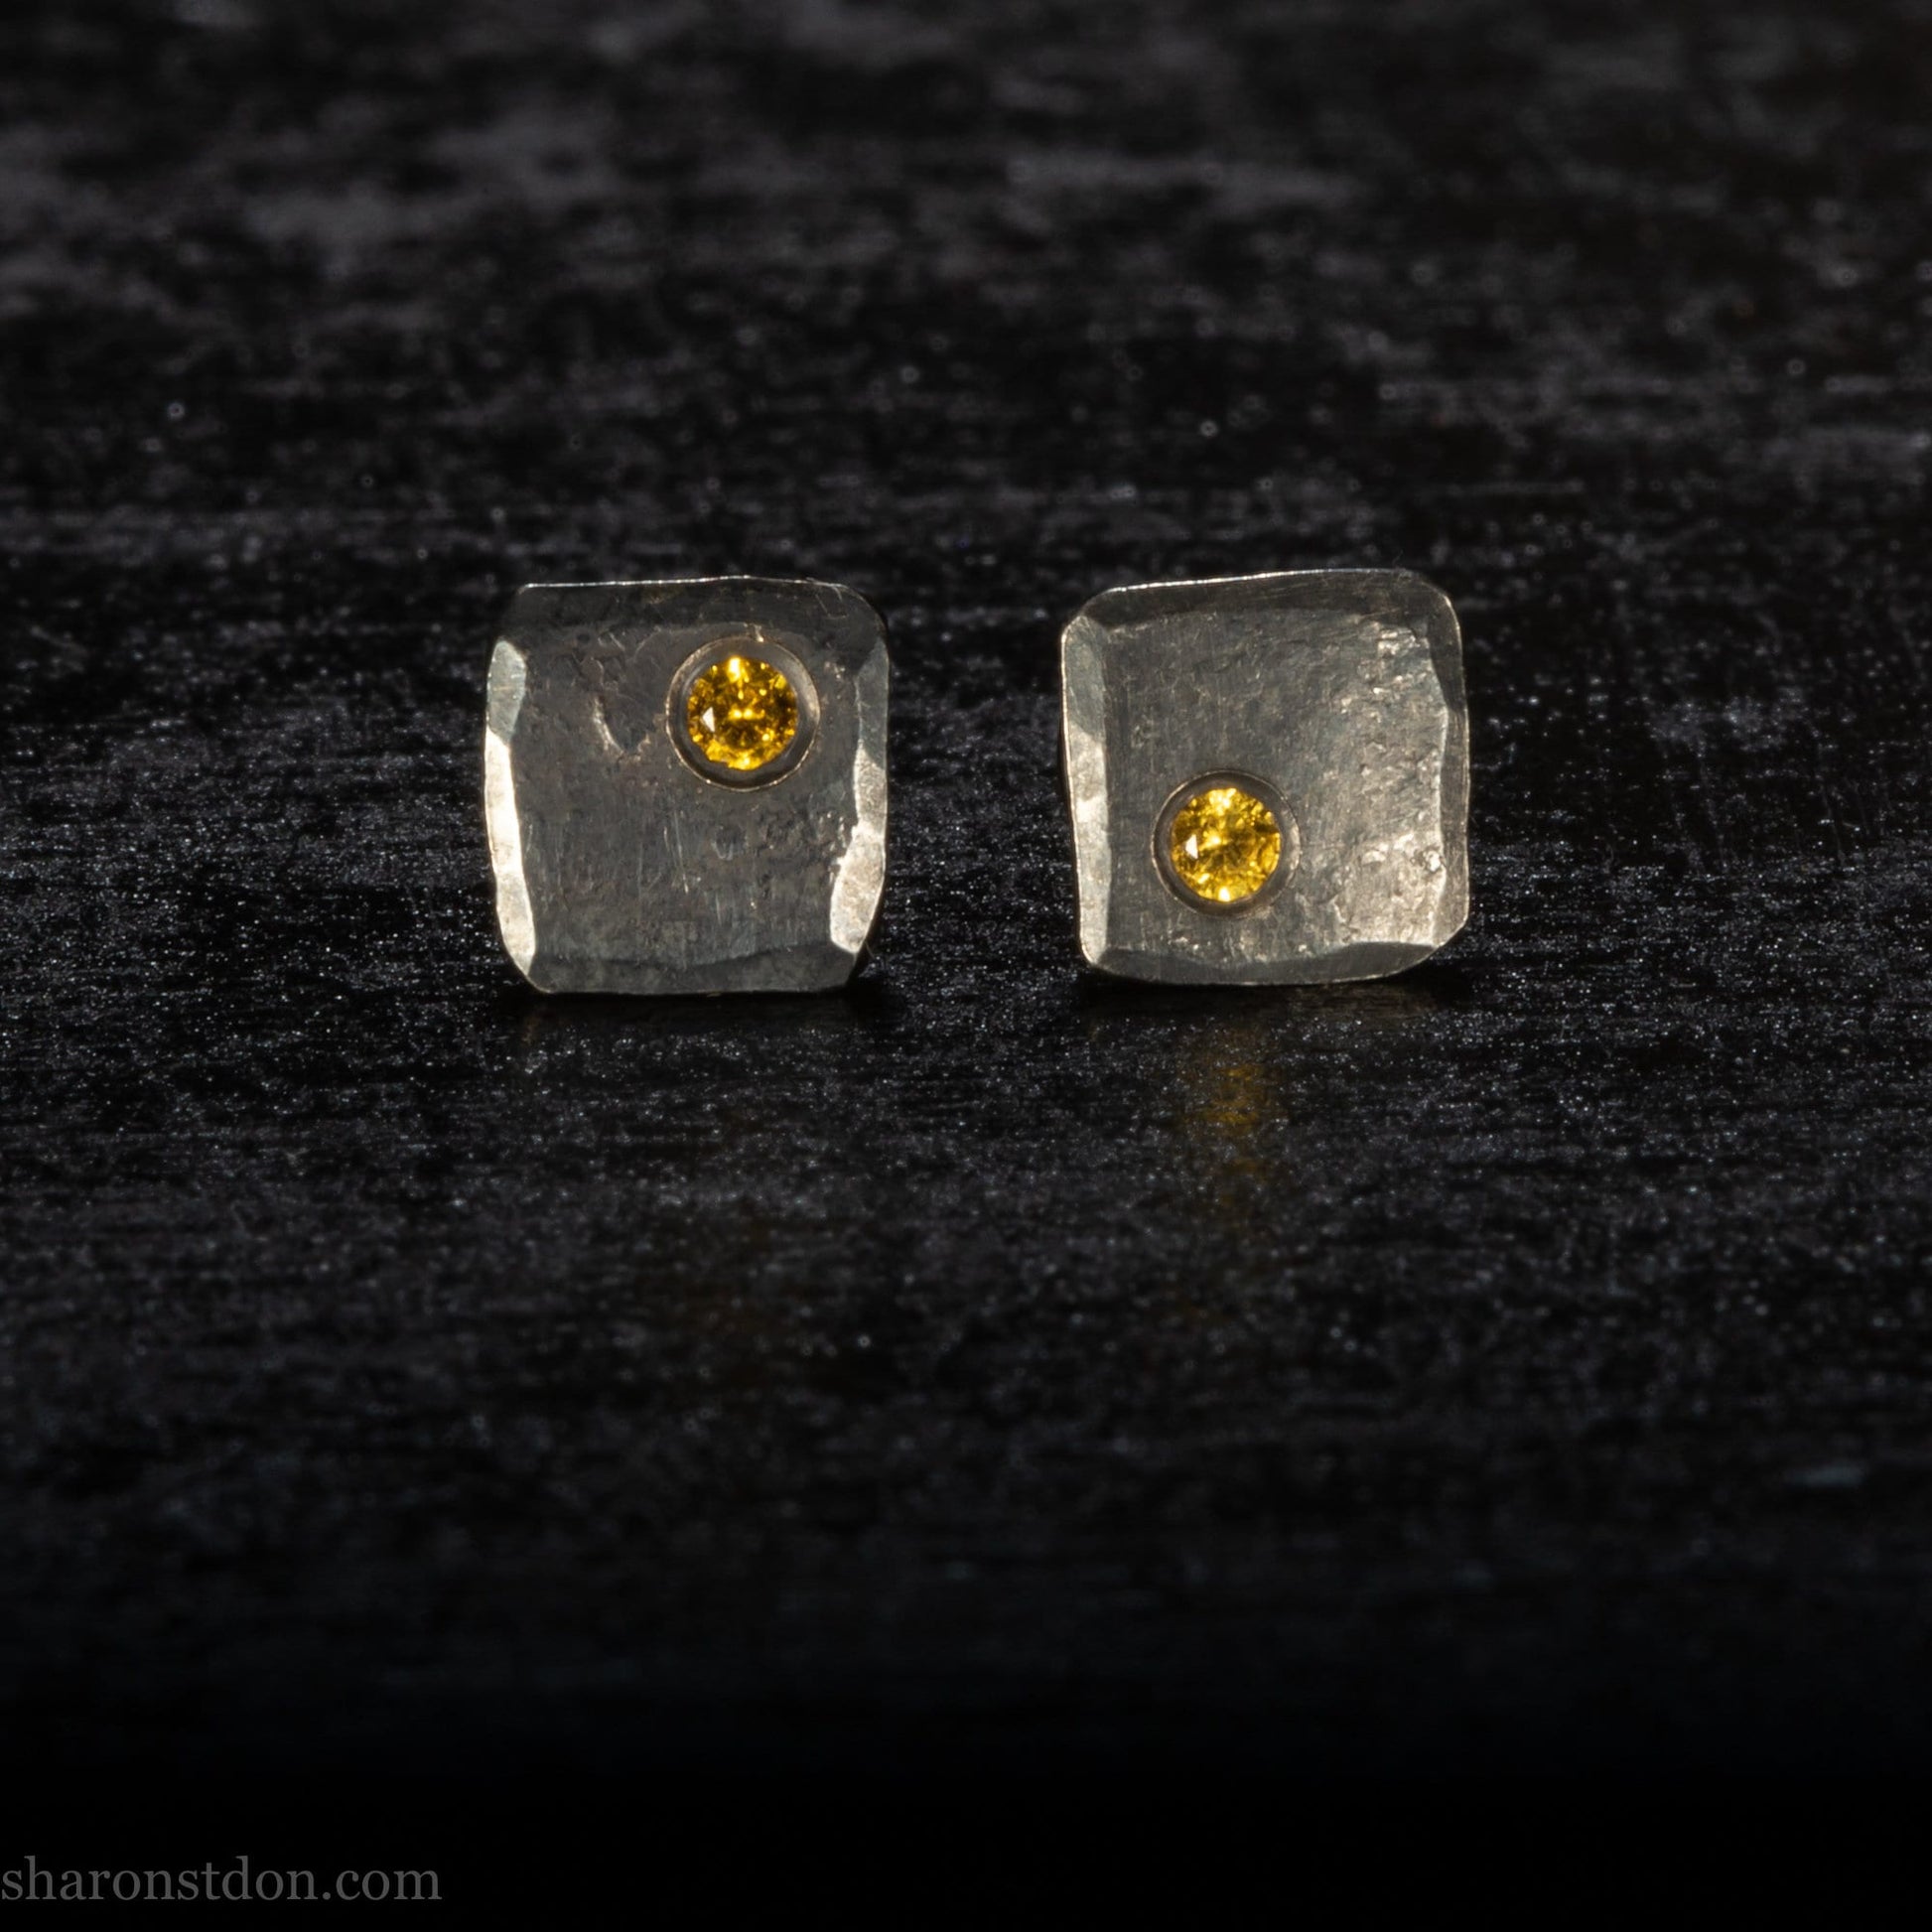 Handmade gemstone stud earrings. Oxidized black 925 sterling silver with canary yellow diamonds. Made by Sharon SaintDon in North America.